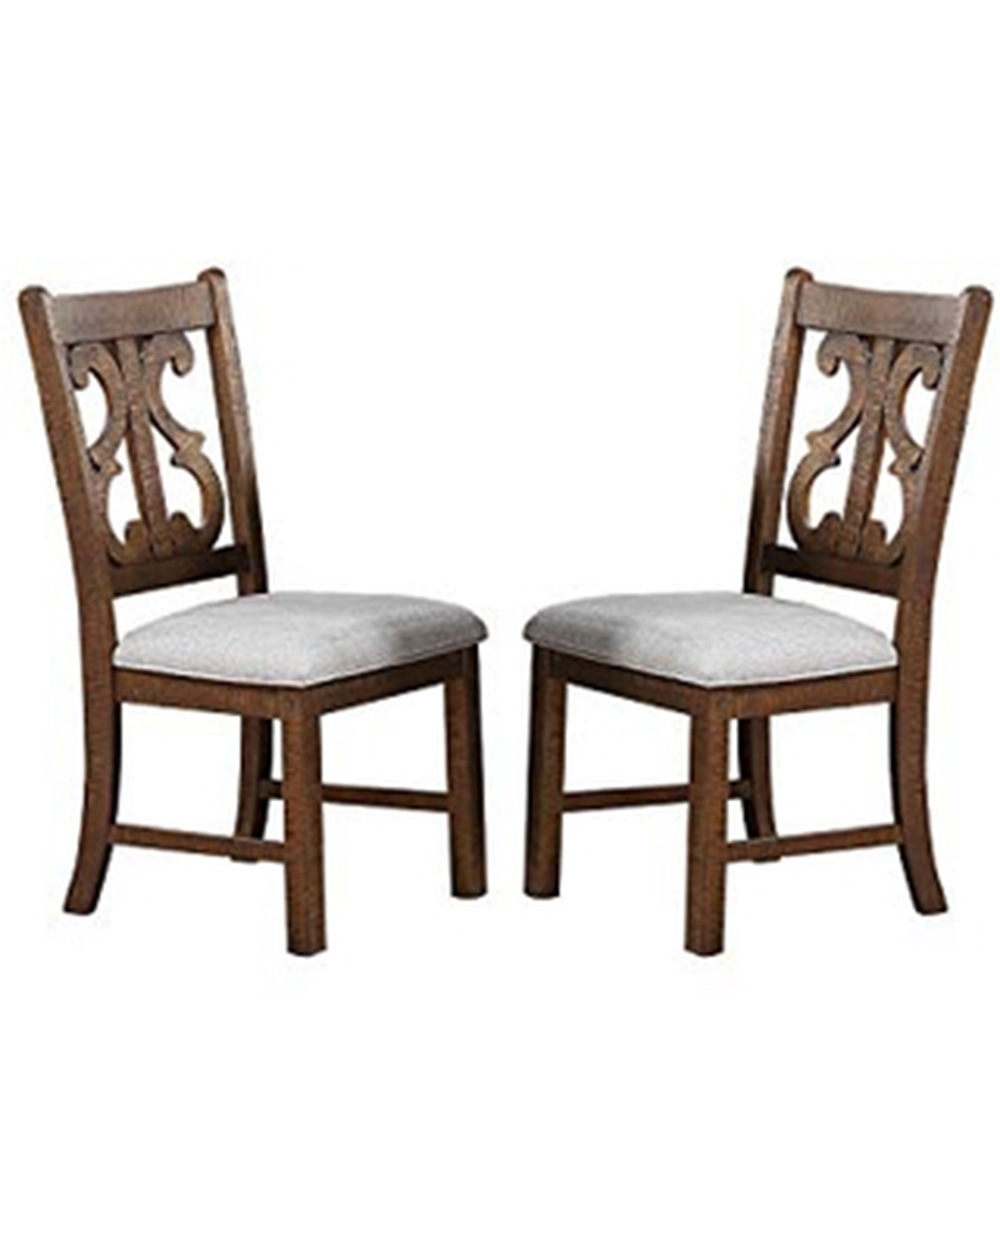 Upholstered Dining Chair Set of 2, with Backrest, and Wooden Legs, for Restaurant, Cafe, Tavern, Office, Living Room - Brown